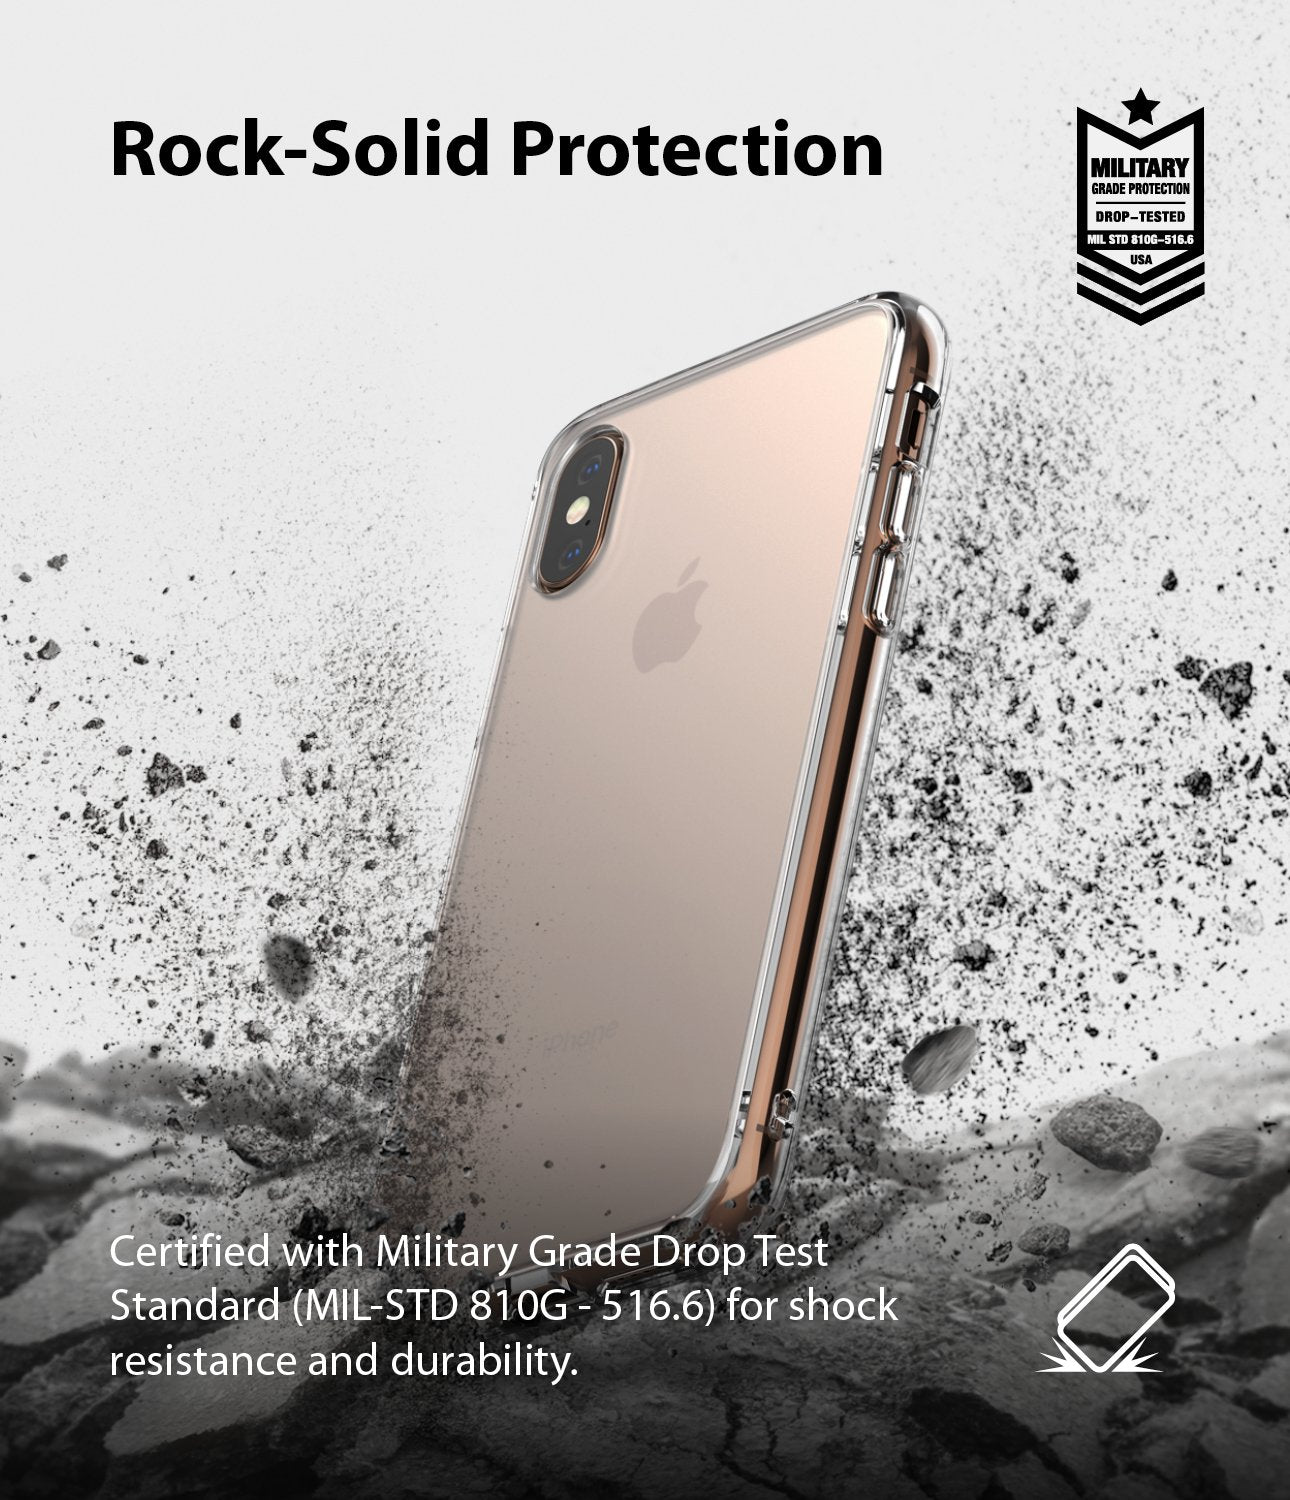 ringke fusion matte for apple iphone xs case cover drop protection